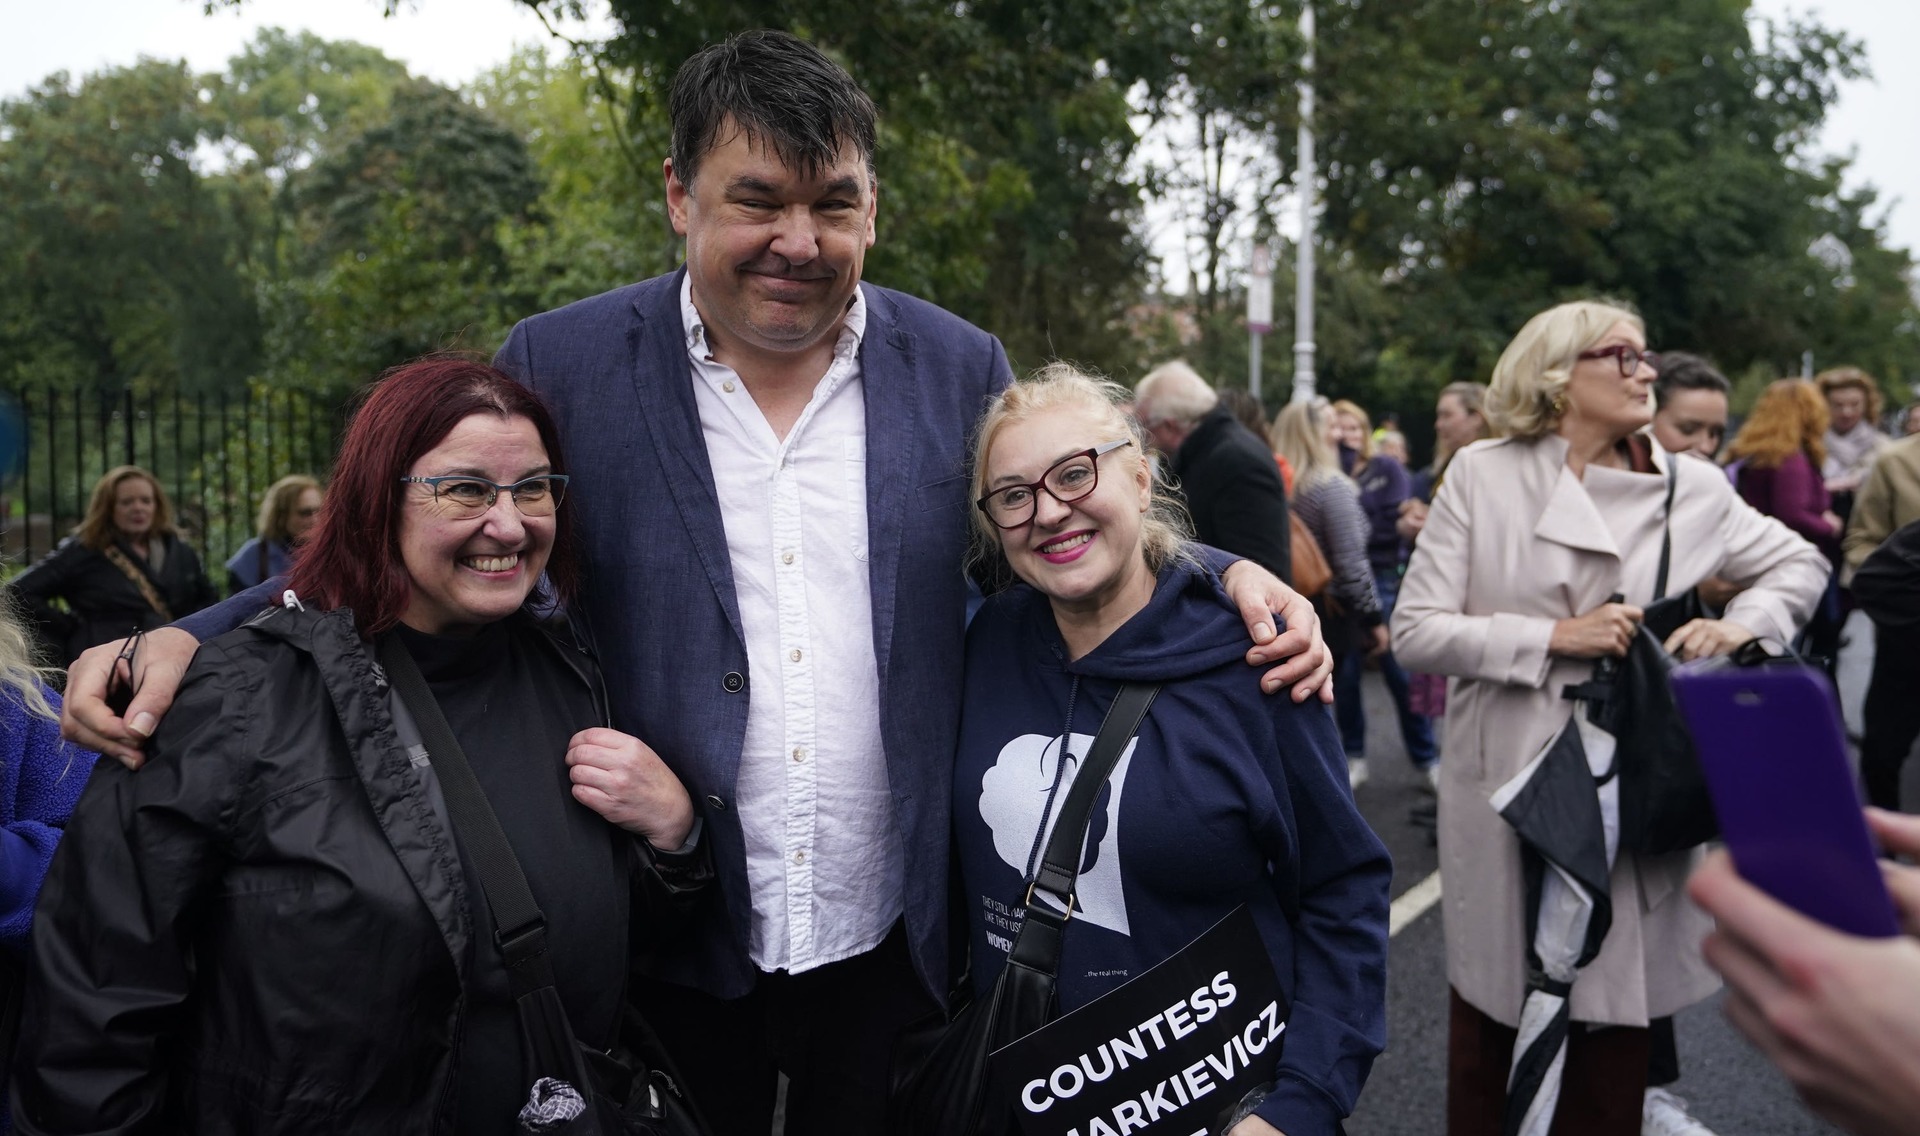 Graham Linehan takes selfies with protesters at a Let Women Speak rally at Merrion Square in Dublin.